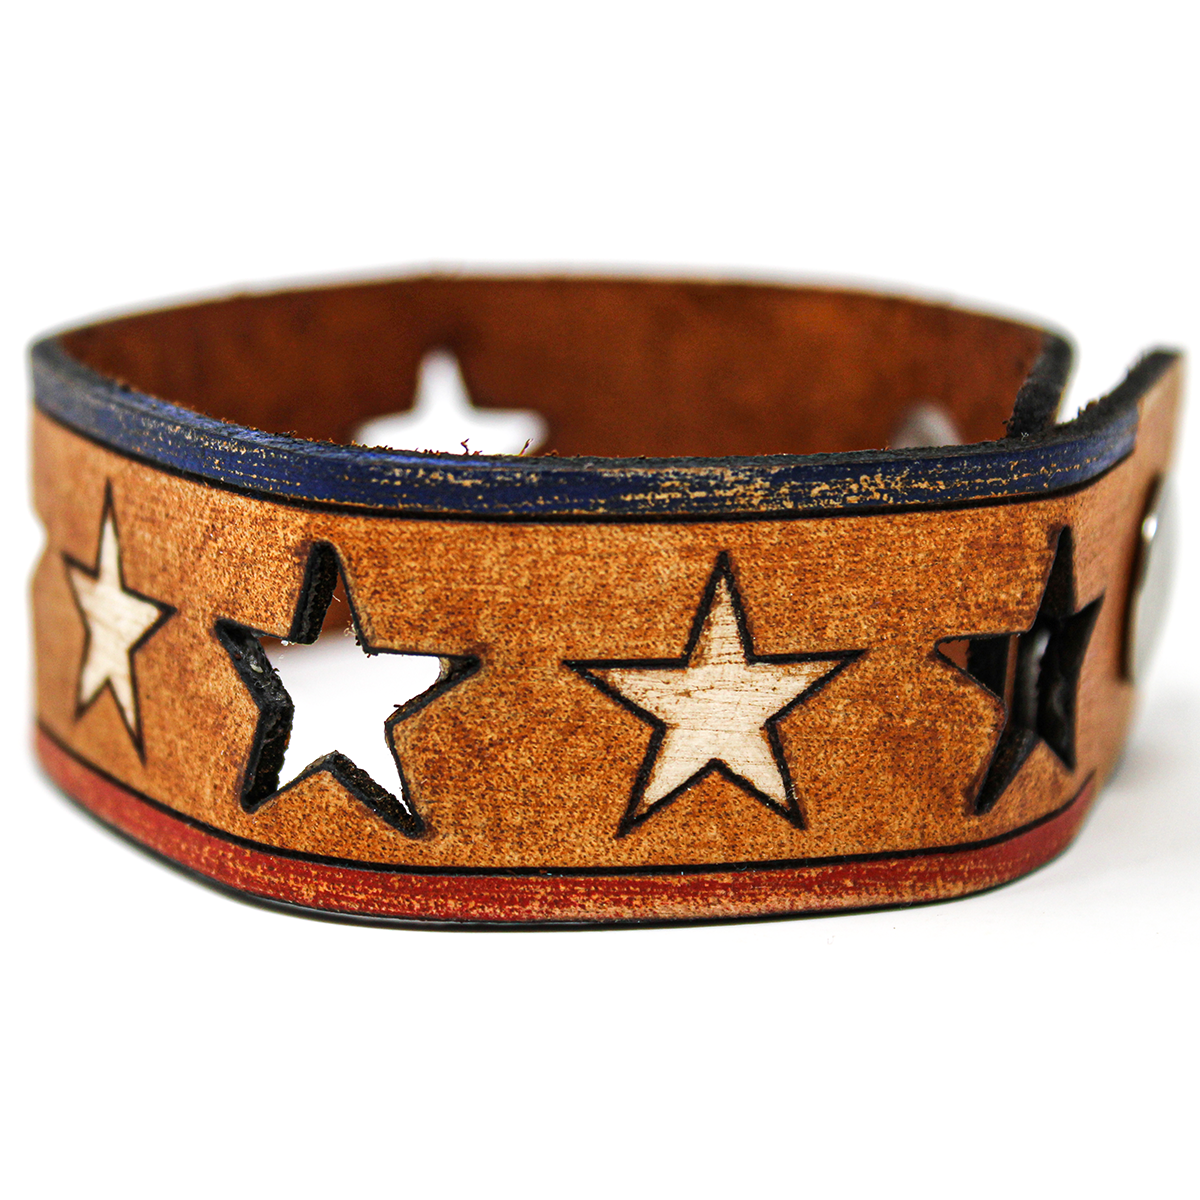 Women's Leather Bracelet - Stars and Bars Repeat